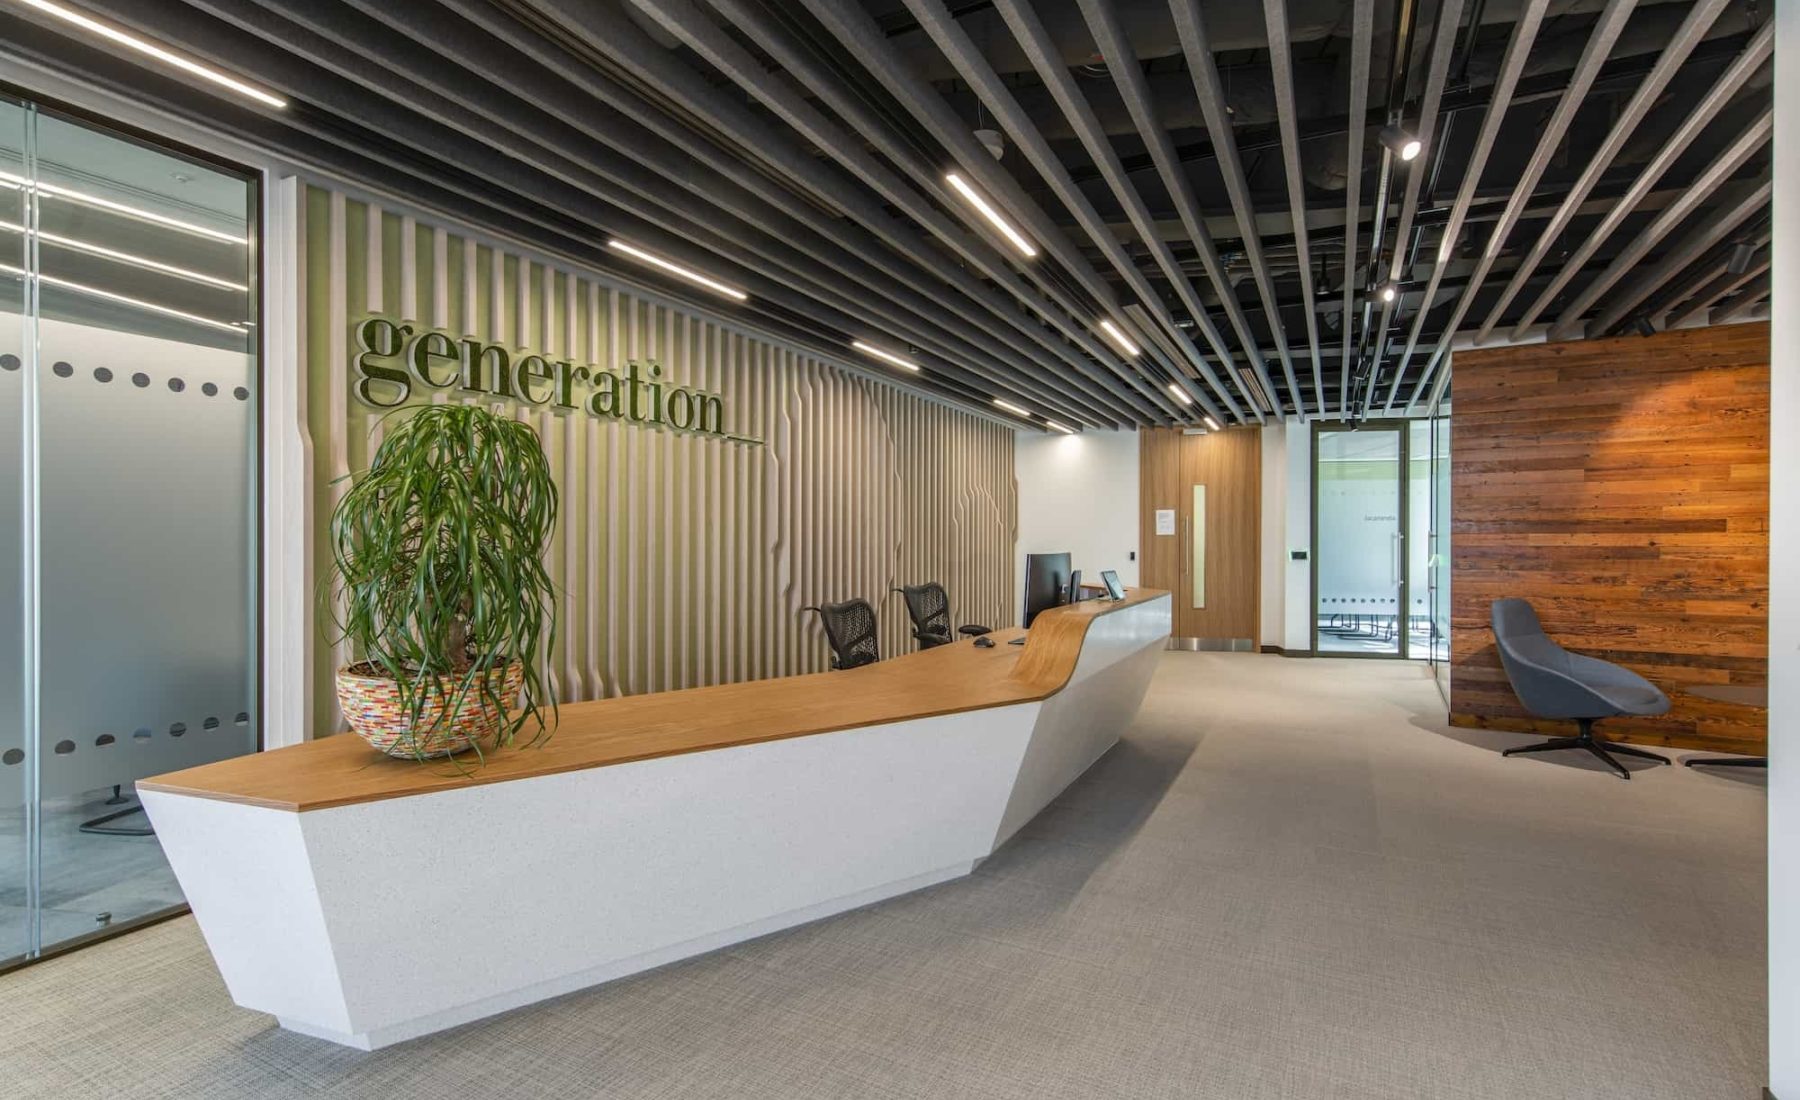 Generation-main-reception in sustainable office design